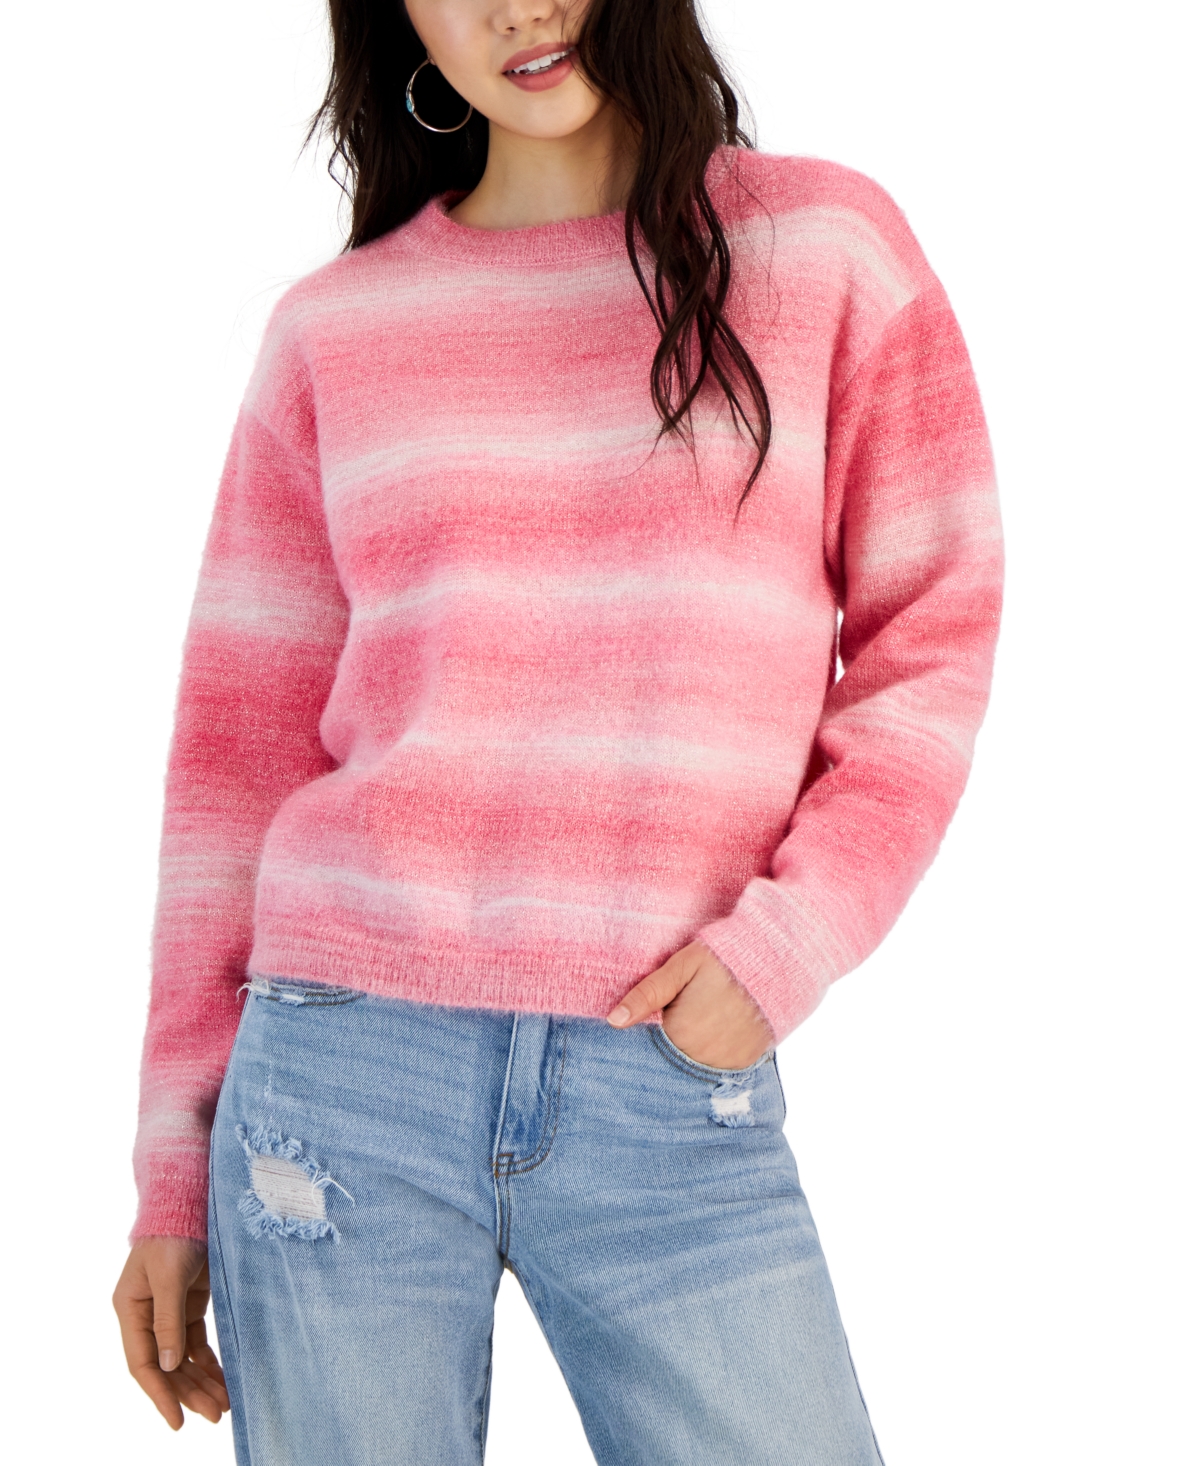 Hooked Up By Iot Juniors' Ombre Striped Metallic-knit Sweater In Carnation Pink Gold Lurex